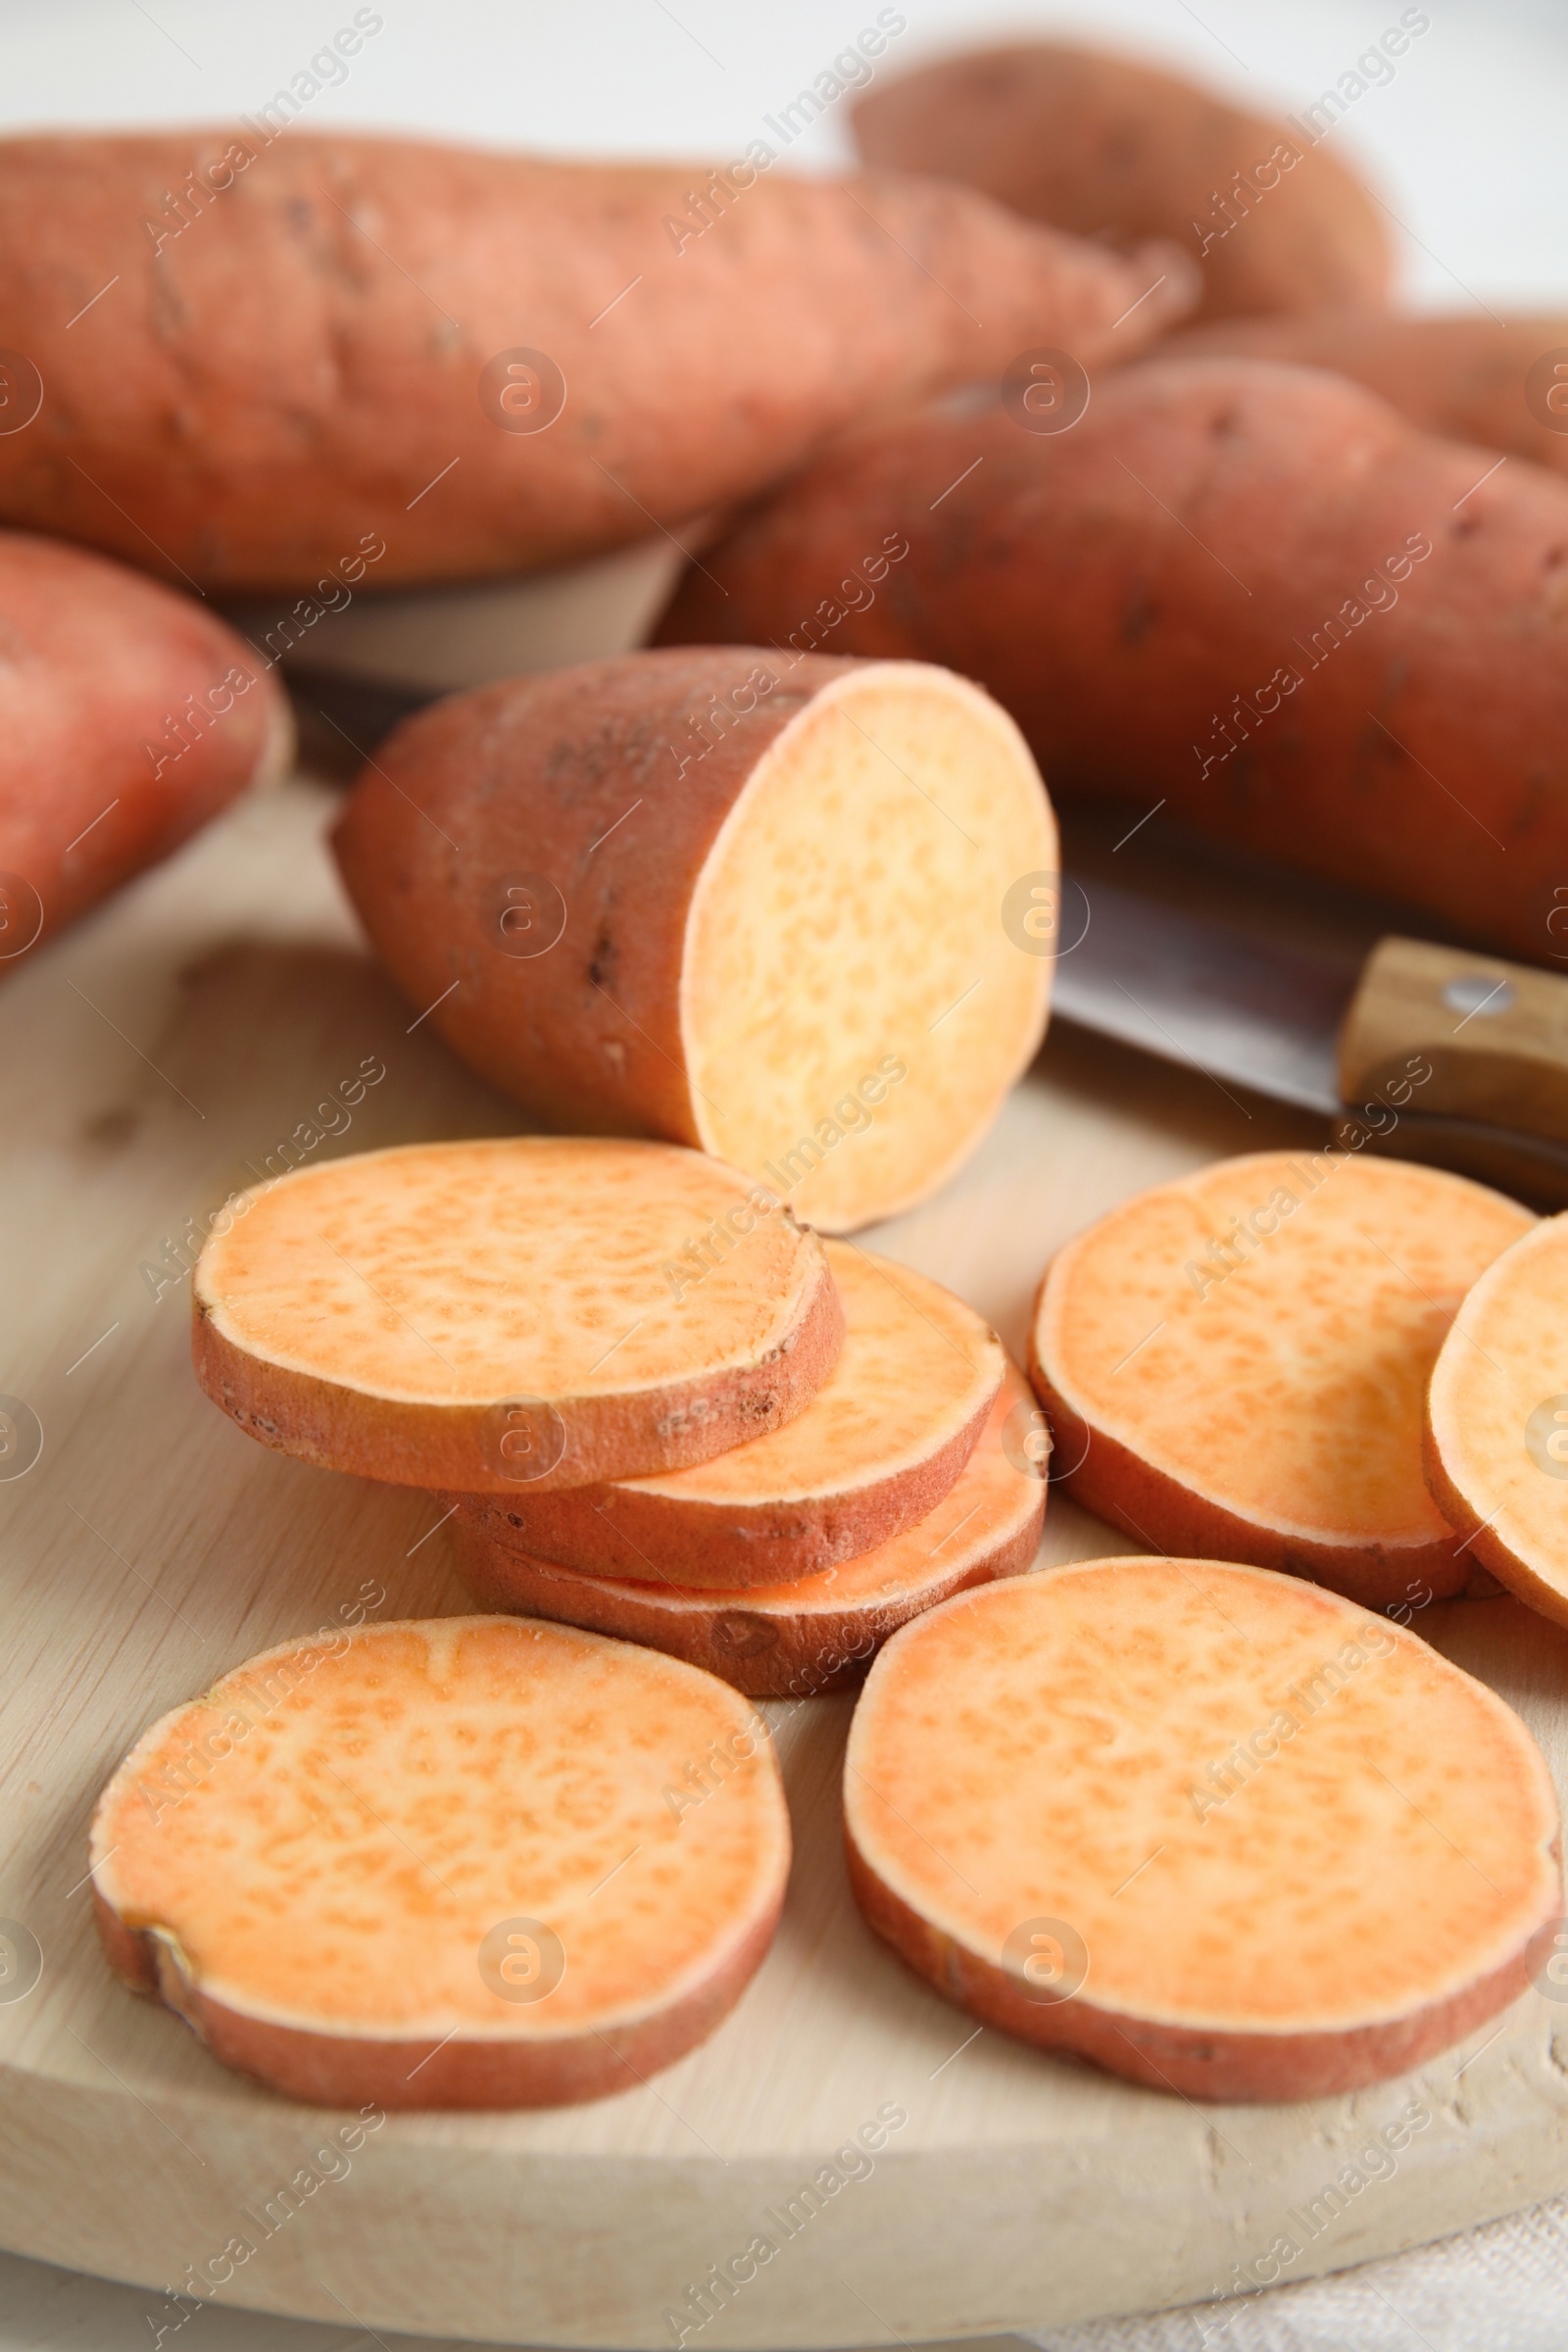 Photo of Whole and cut ripe sweet potatoes on wooden board, closeup